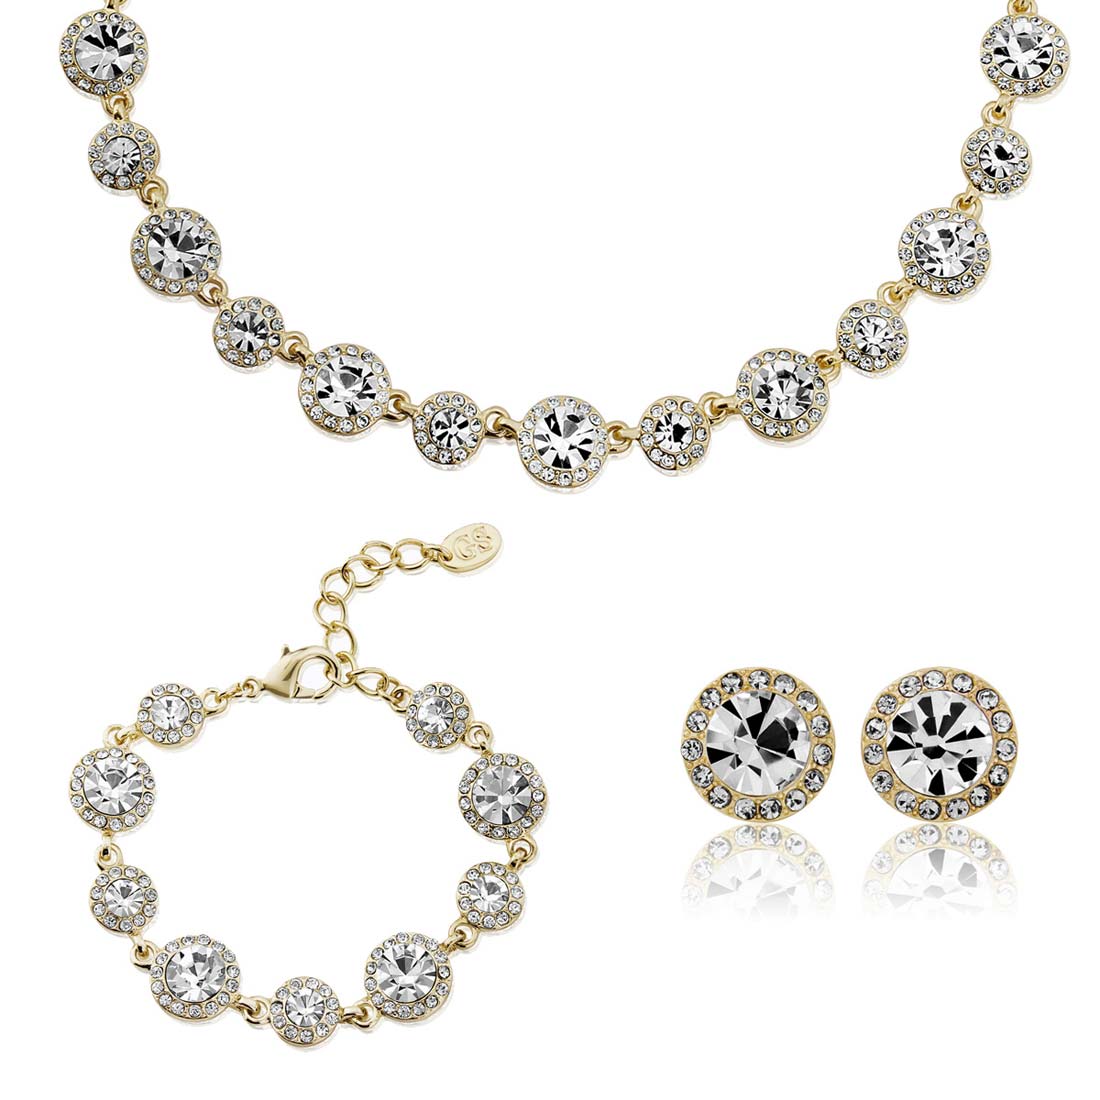 Graceful in Gold Crystal Jewellery Set featuring necklace, bracelet and earrings